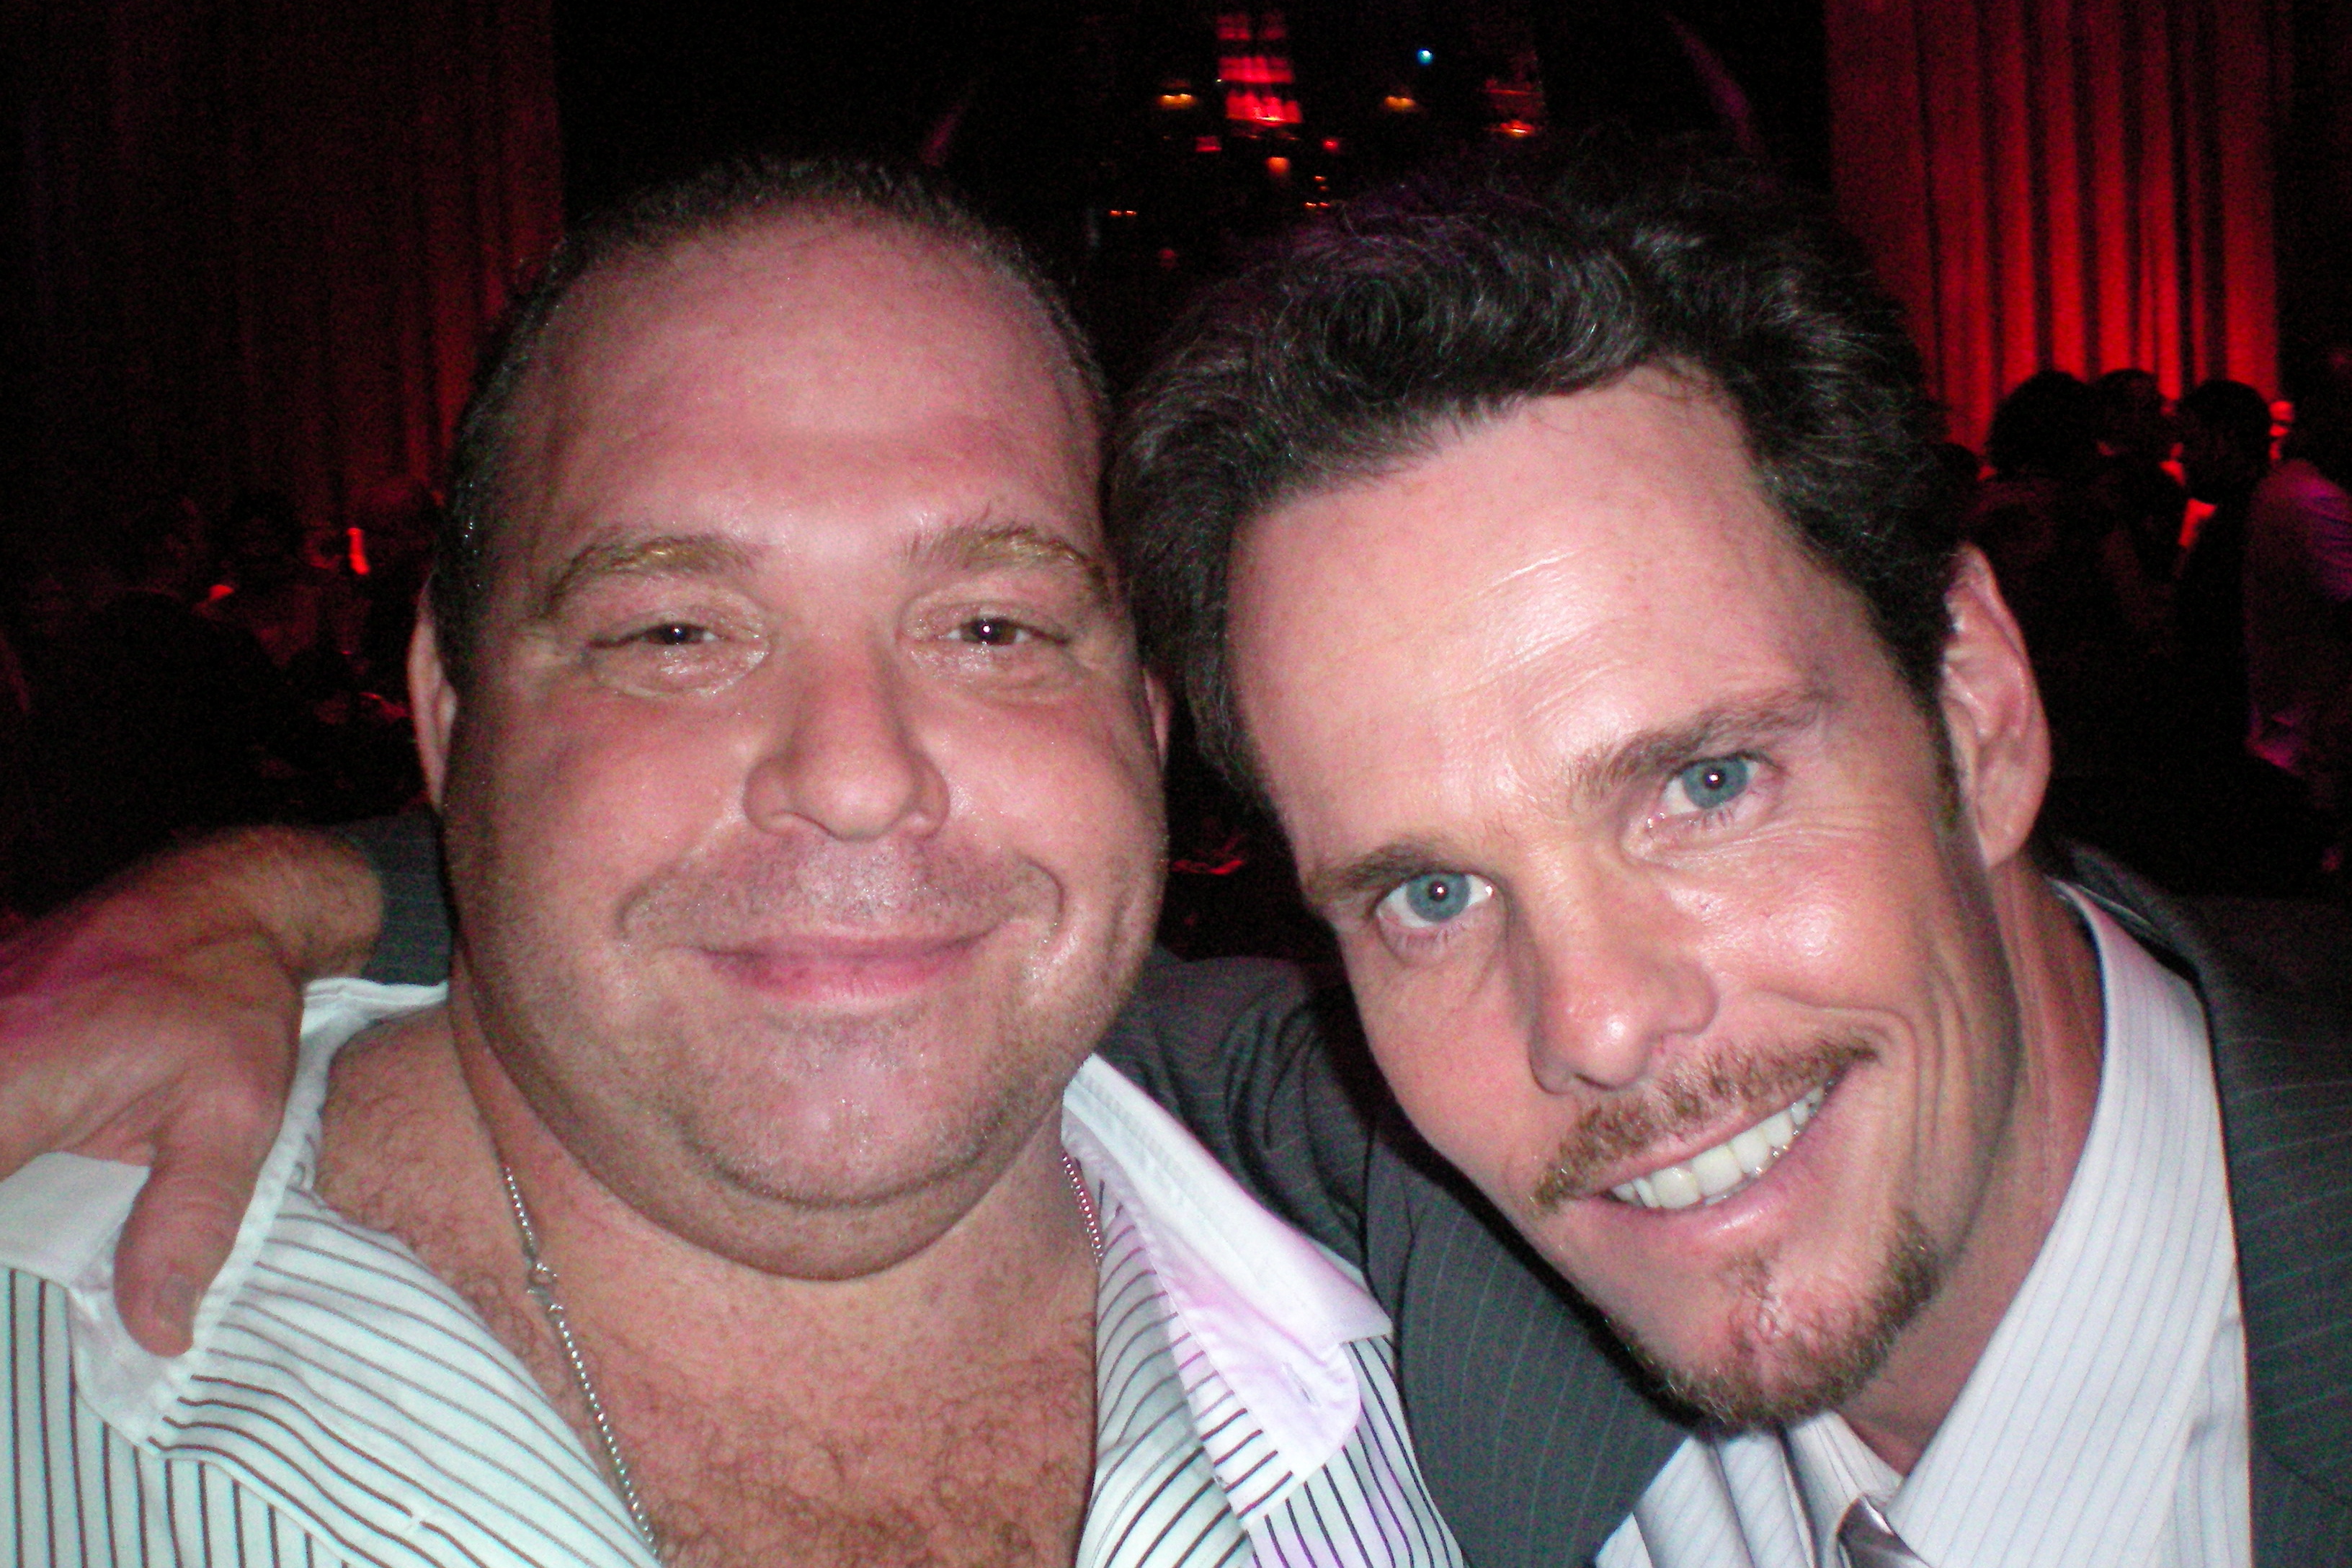 Louis Lombardi & Kevin Dillon at the 'Entourage' NYC Premiere after party